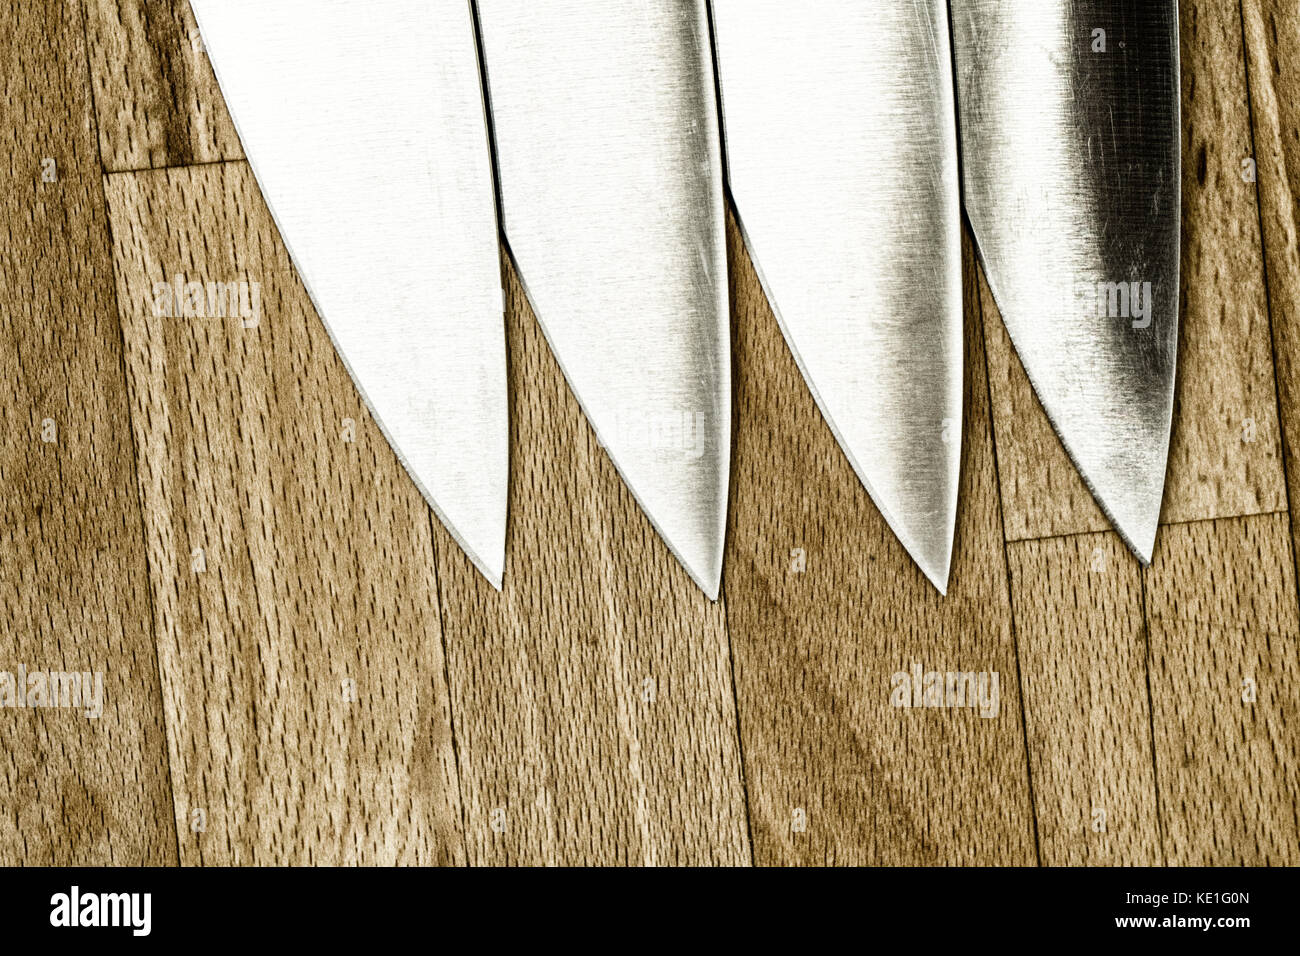 Four identical kitchen knives on a wooden work top Stock Photo